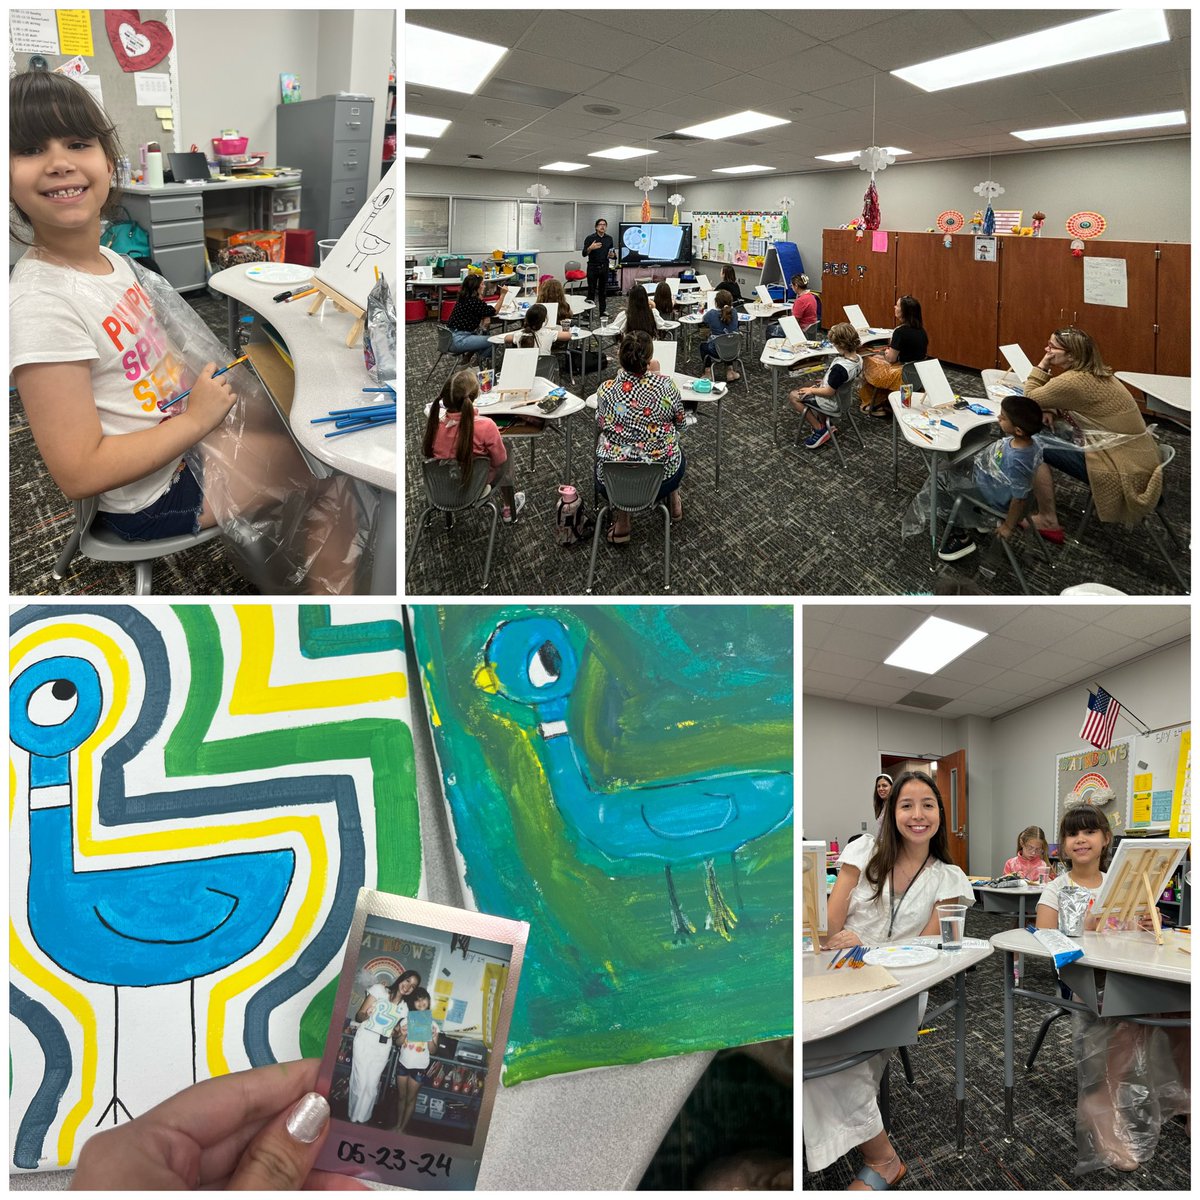 🎨 Had an amazing time painting with our auction winners and a brilliant illustrator today! These firsties were buzzing with creativity and joy. @BlackBearkats